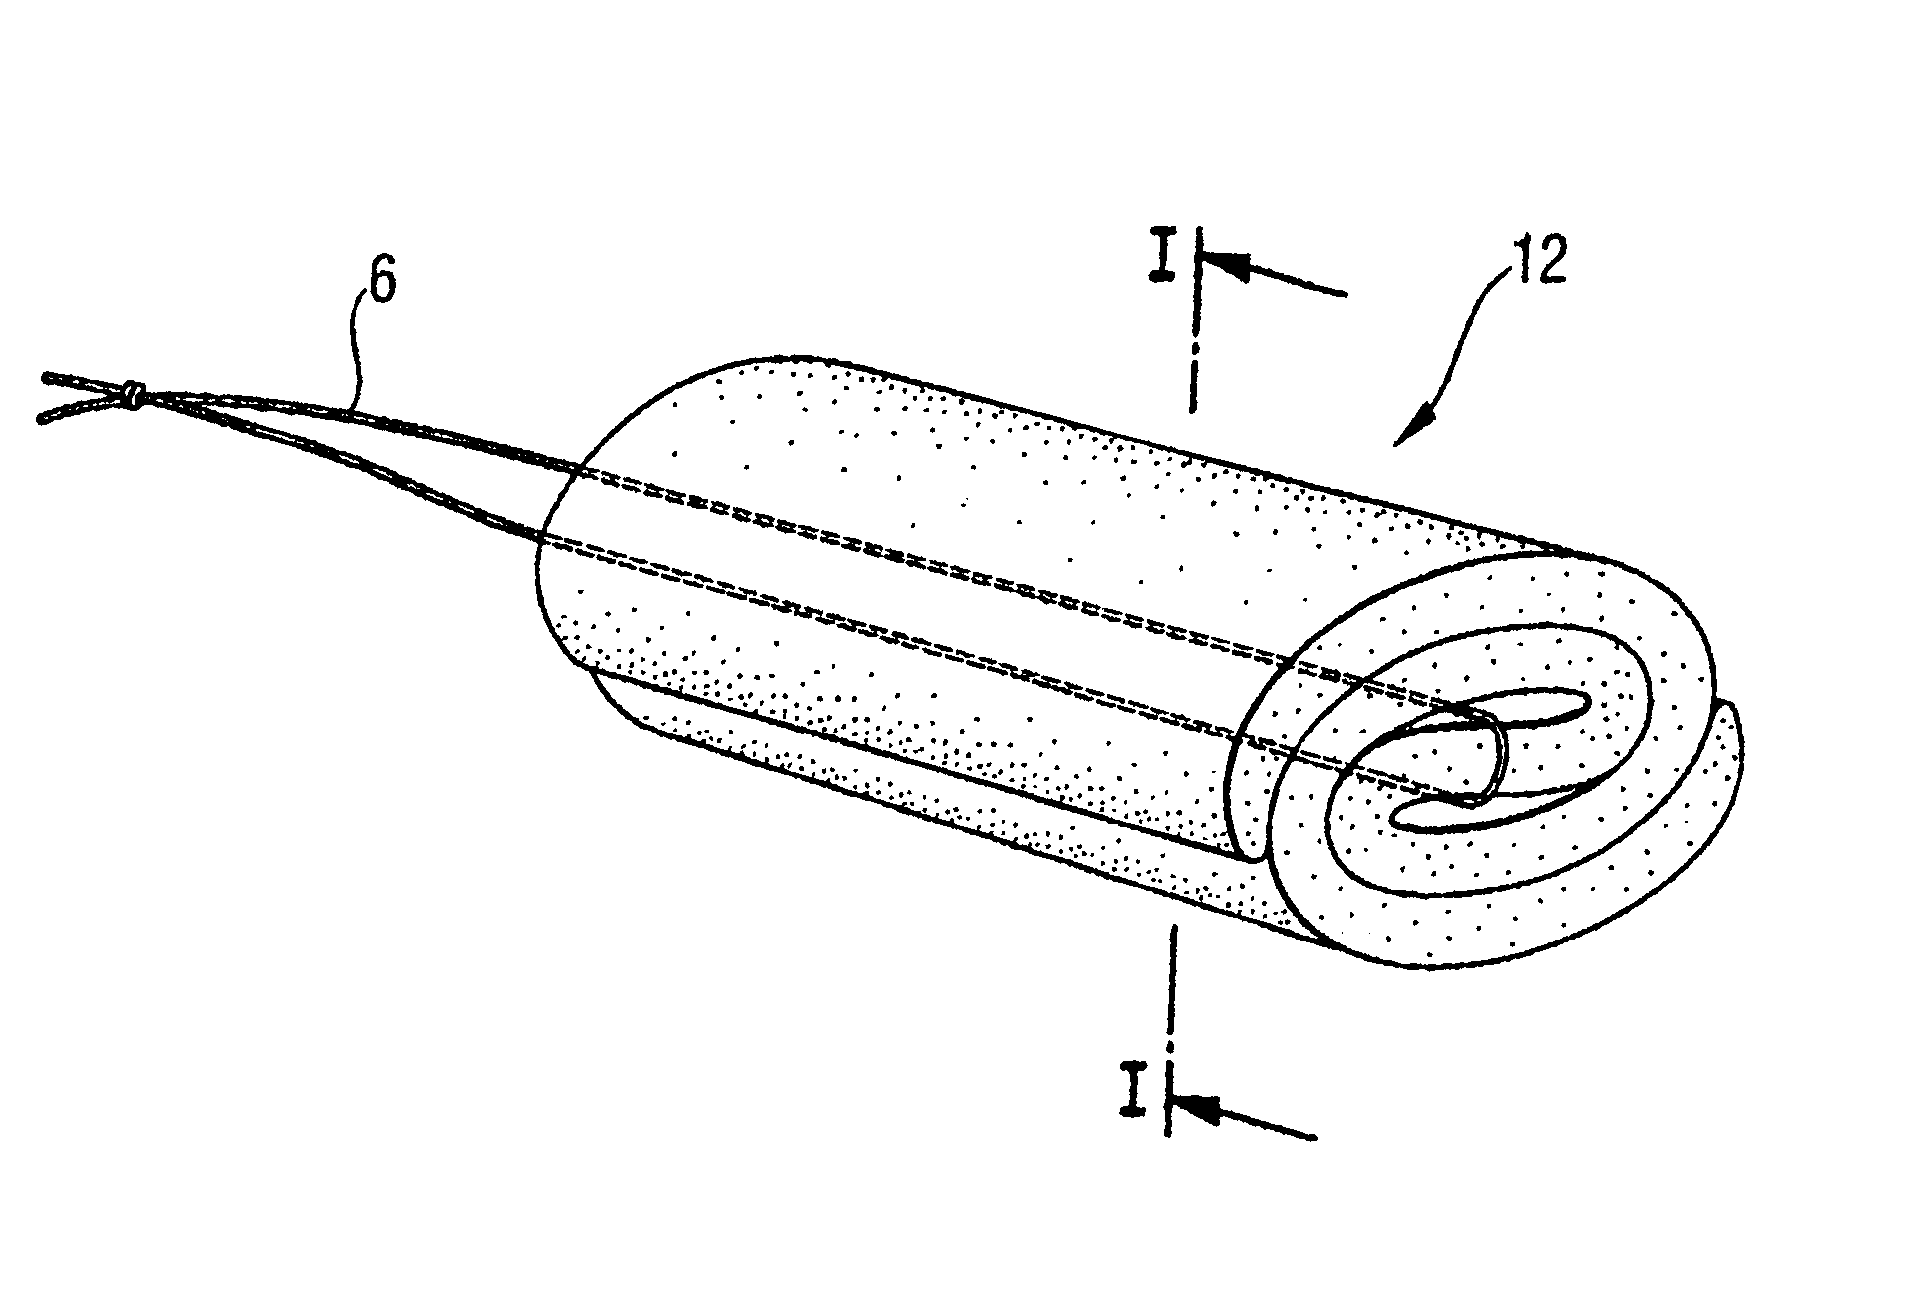 Tampon having an oval form after expansion and process for producing the same